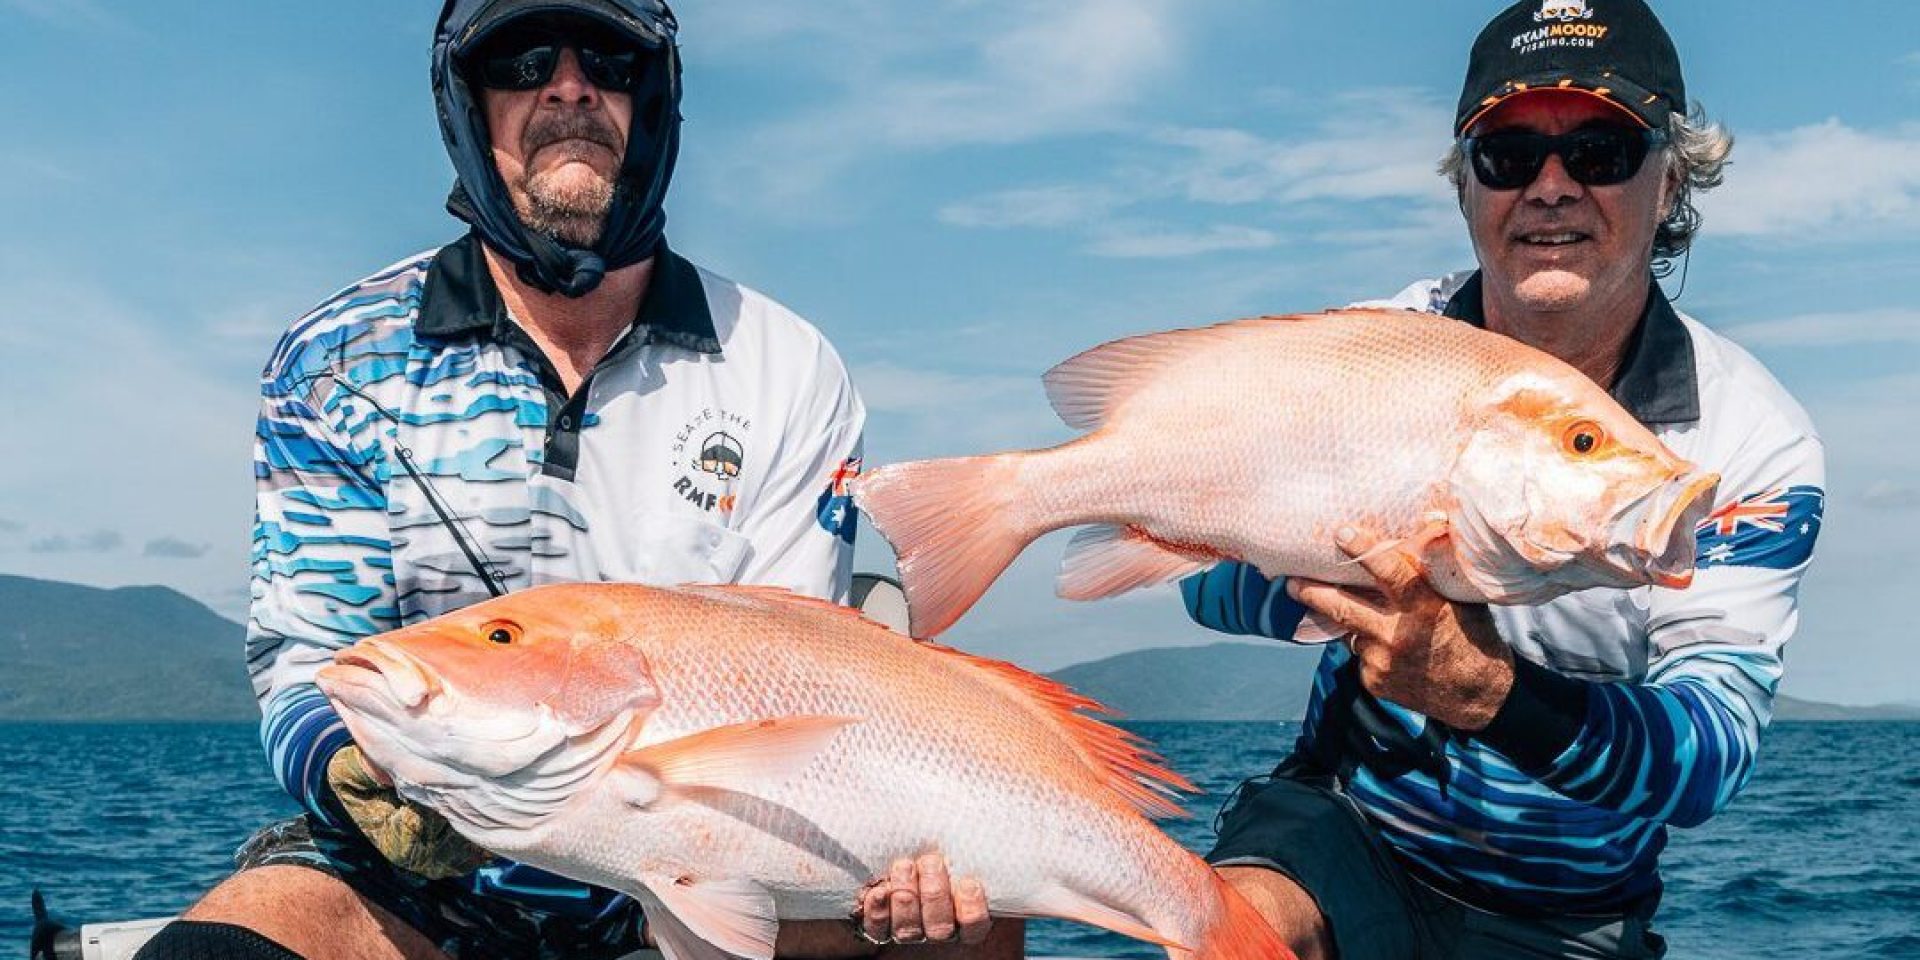 These Fish Kept me very Busy! Snapper Fishing by catch Catch & Cook 